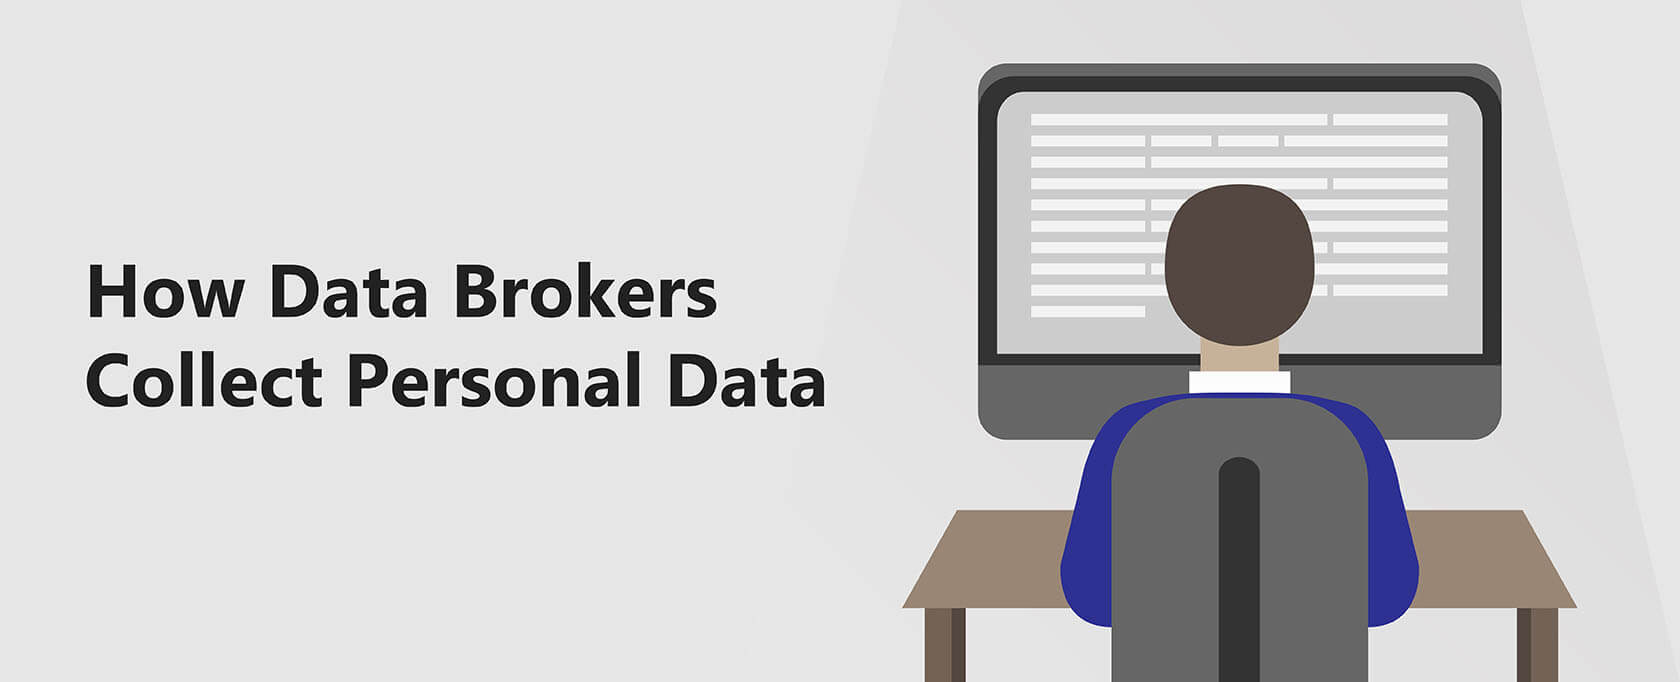 How Data Brokers Collect Personal Data